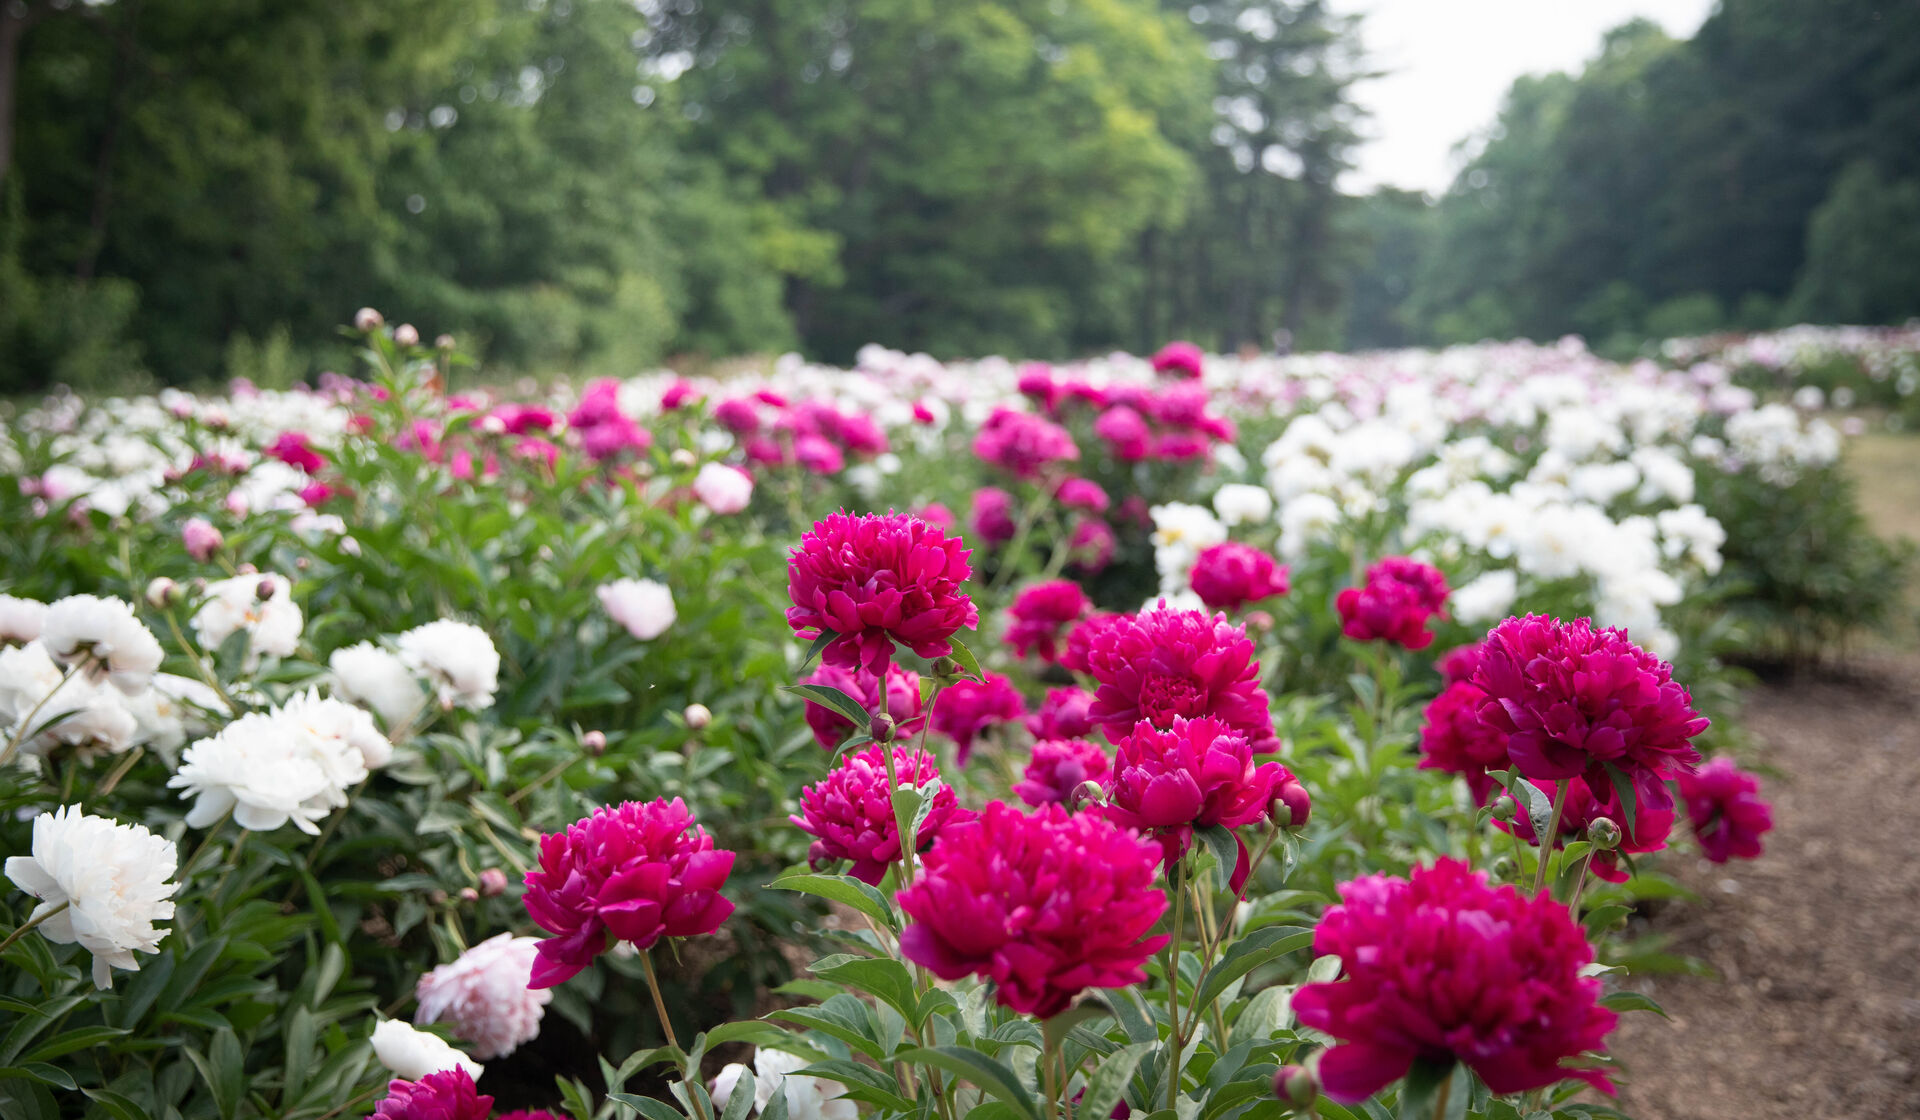 Rows of pink and white peonies at Nichols Arboretum.